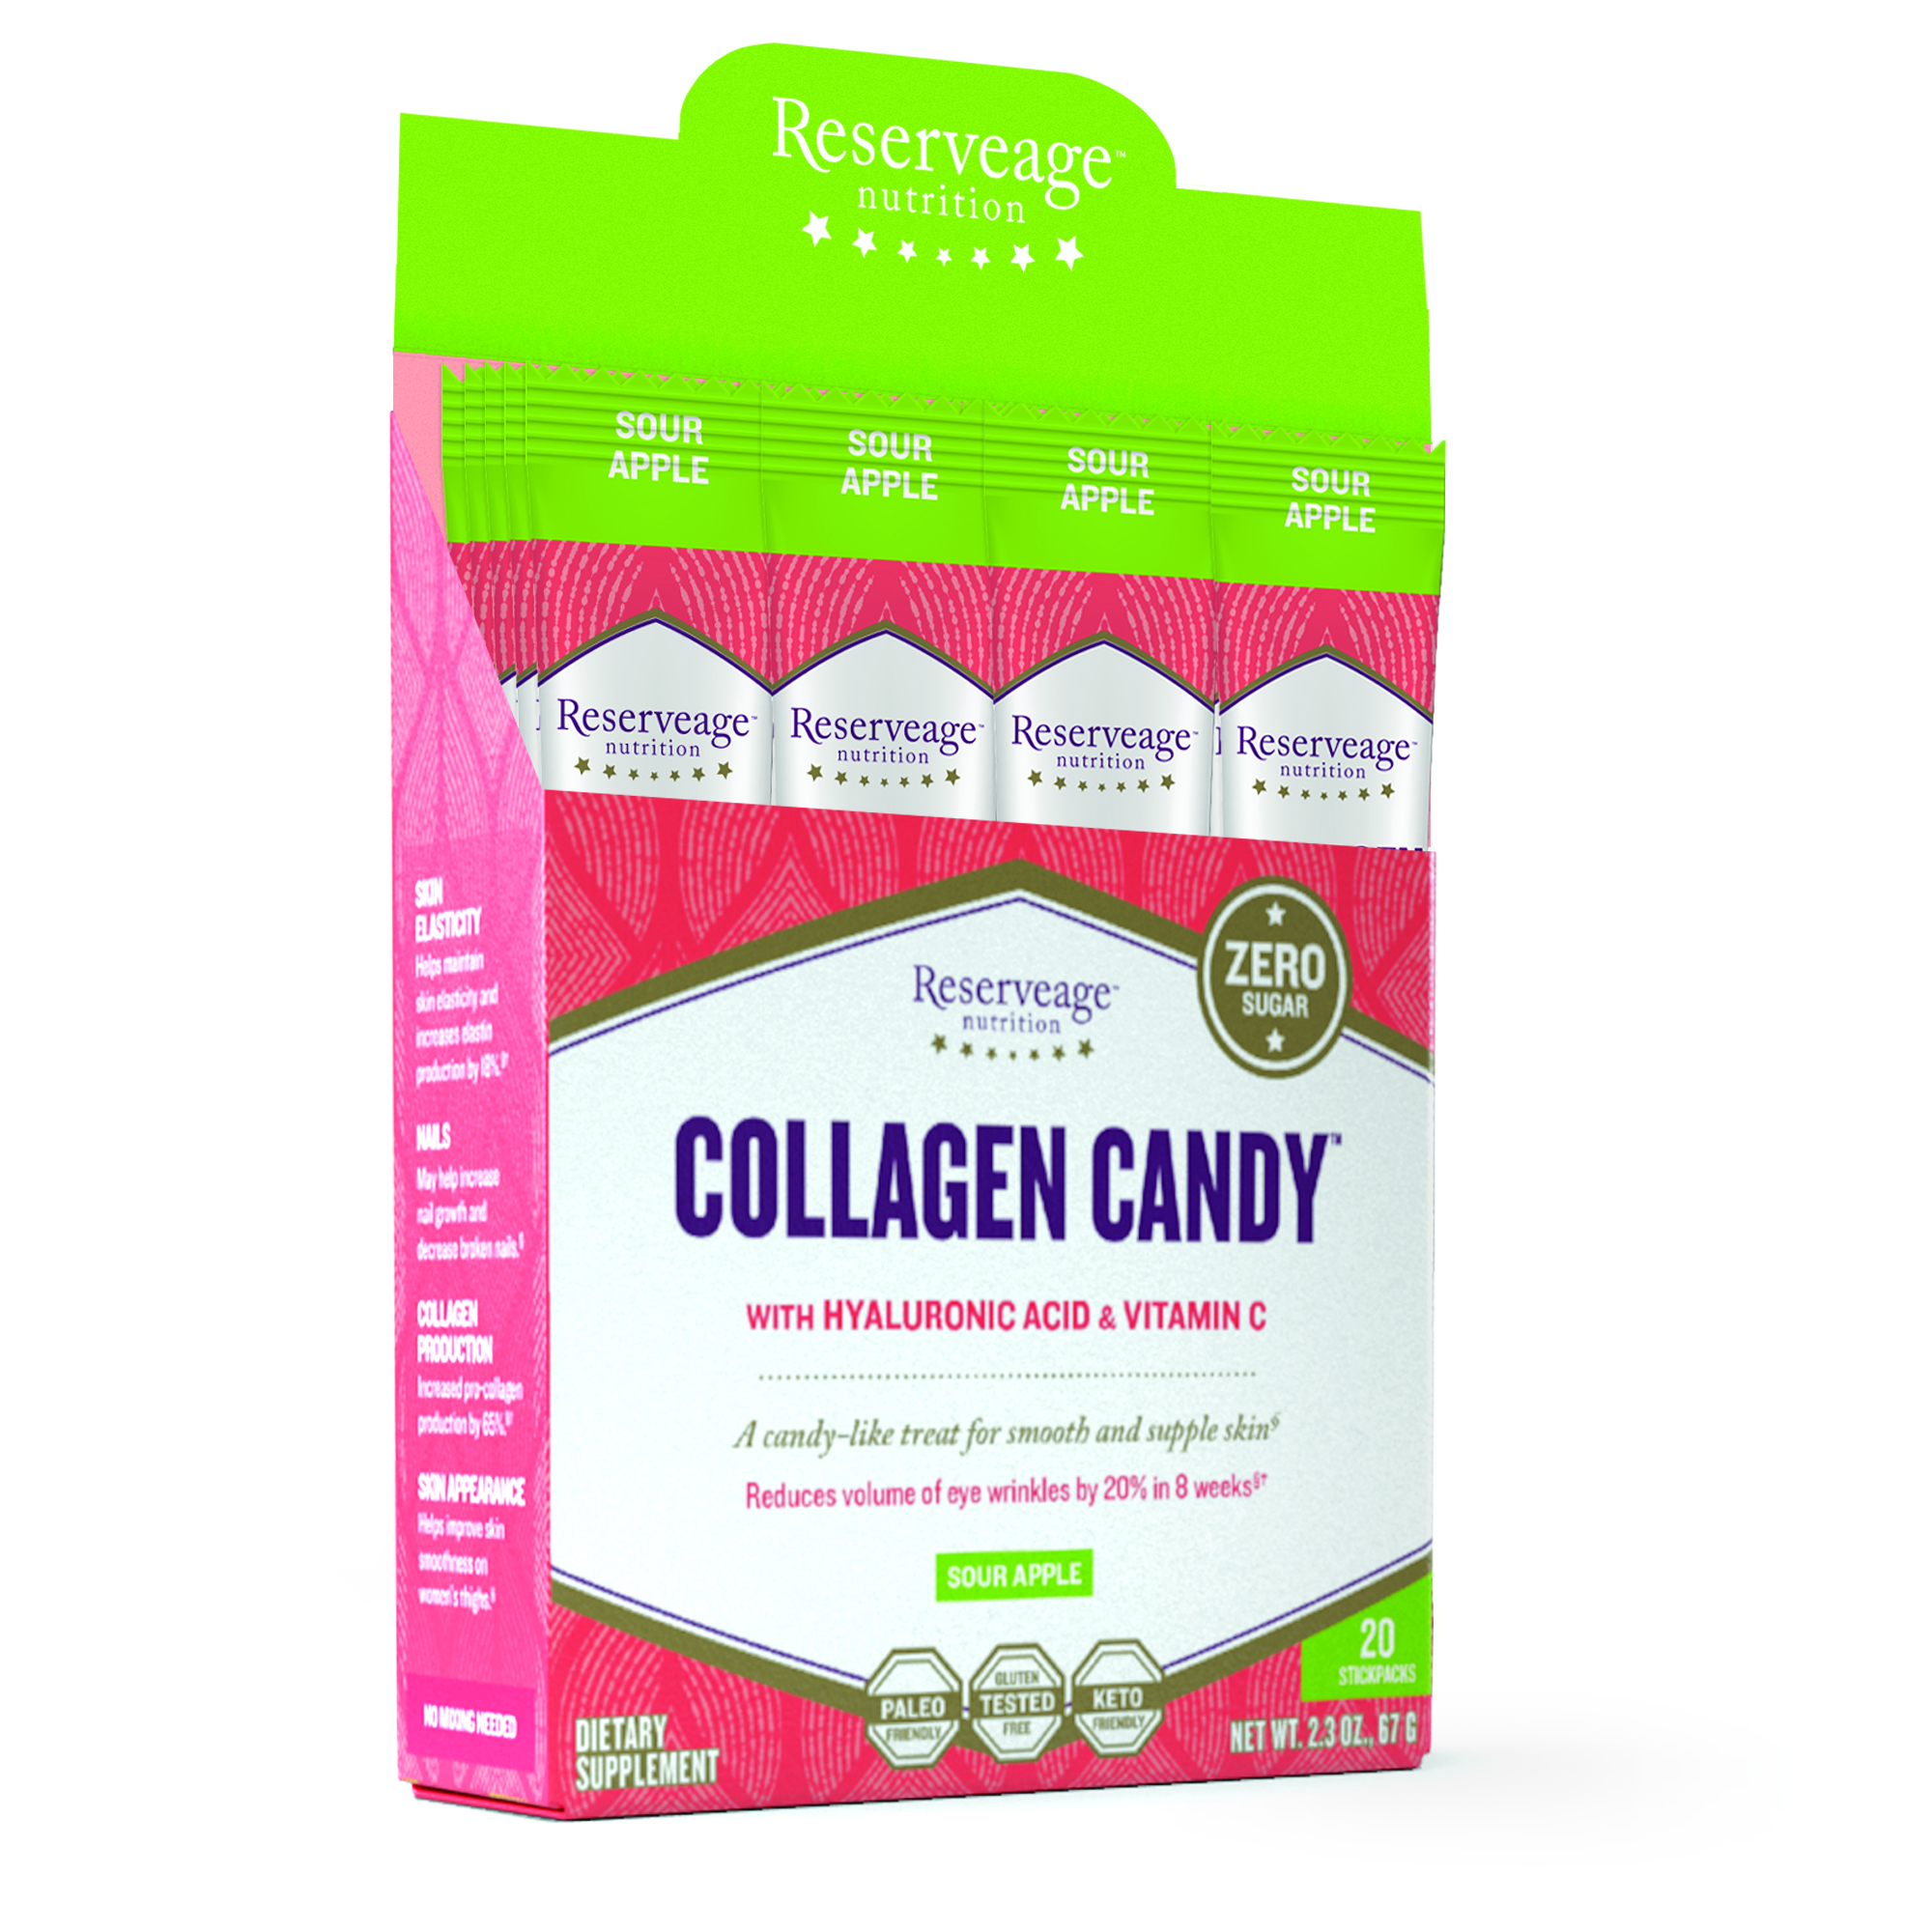 Collagen Candy by Reserveage